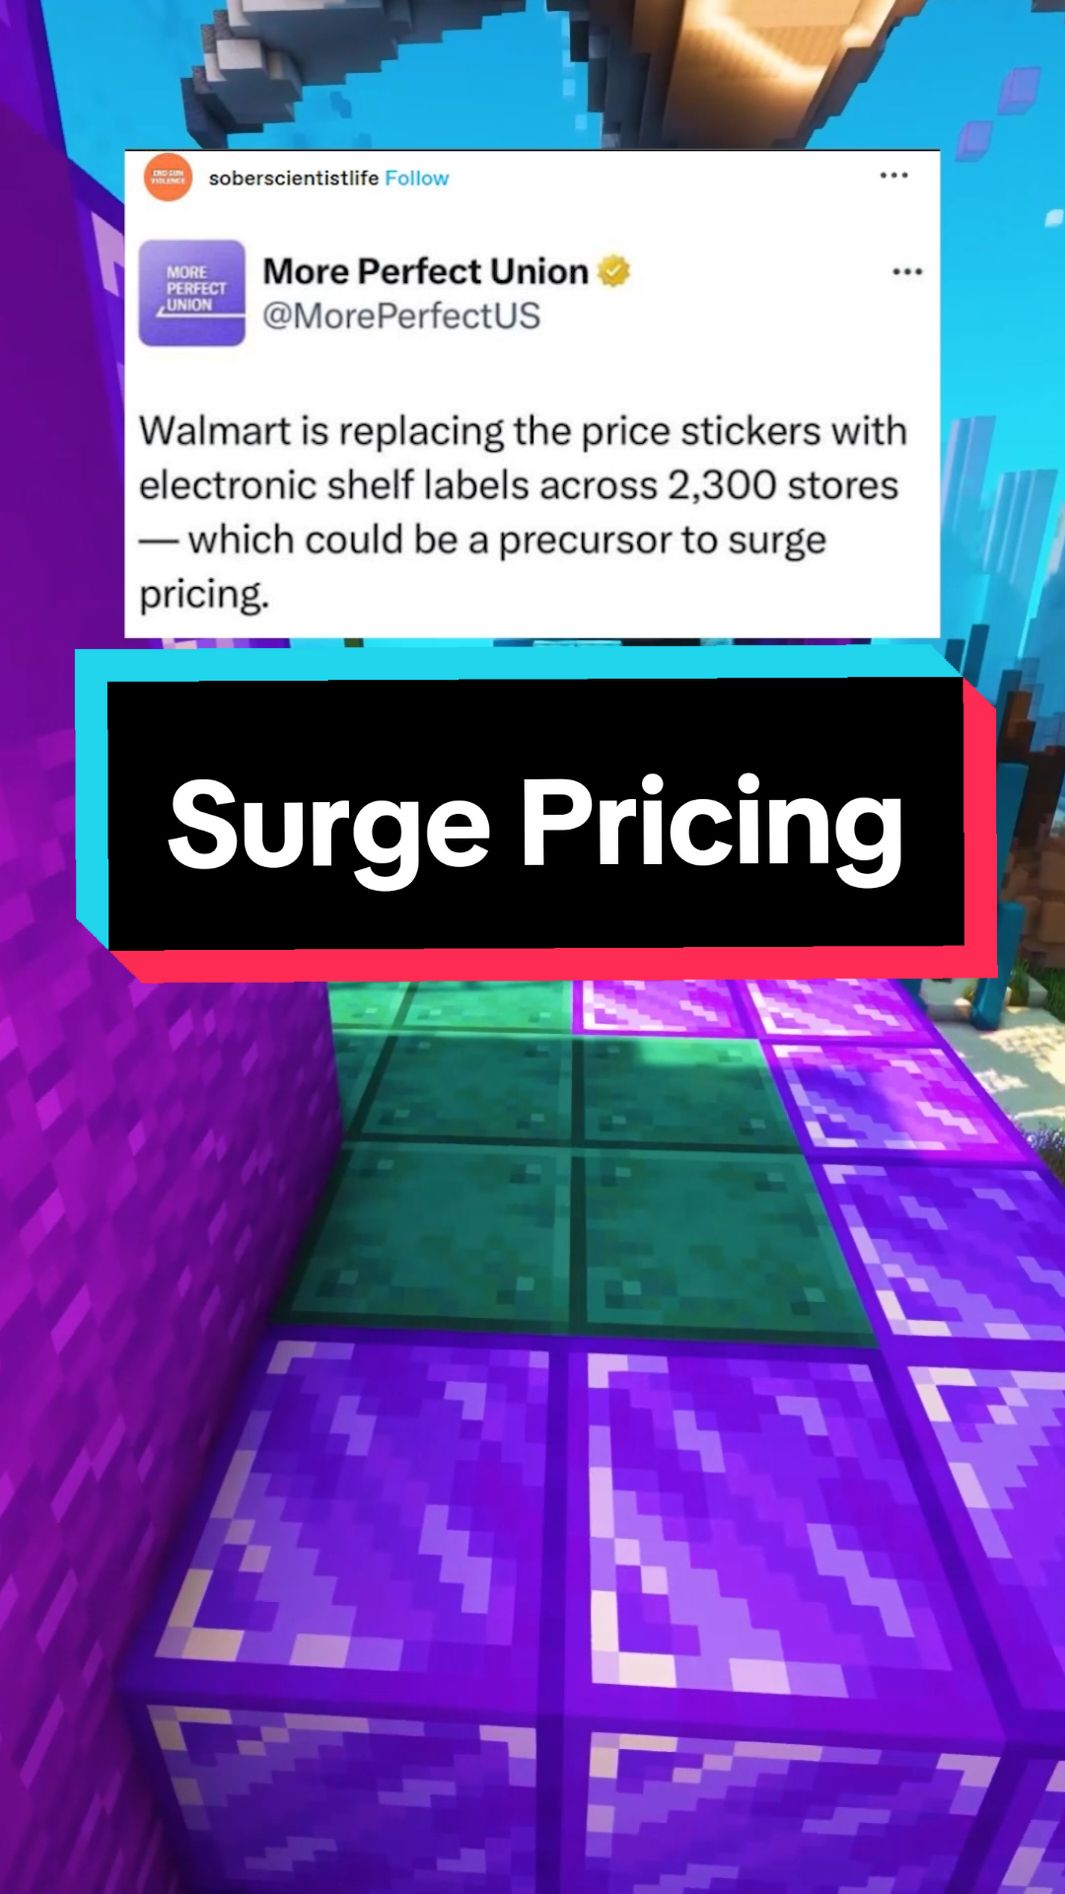 Walmart is replacing the price stickers with electronic shelf labels across 2,300 stores - which could be a precursor to surge pricing. #qna #tumblr #funny #storytime #walmart #price 